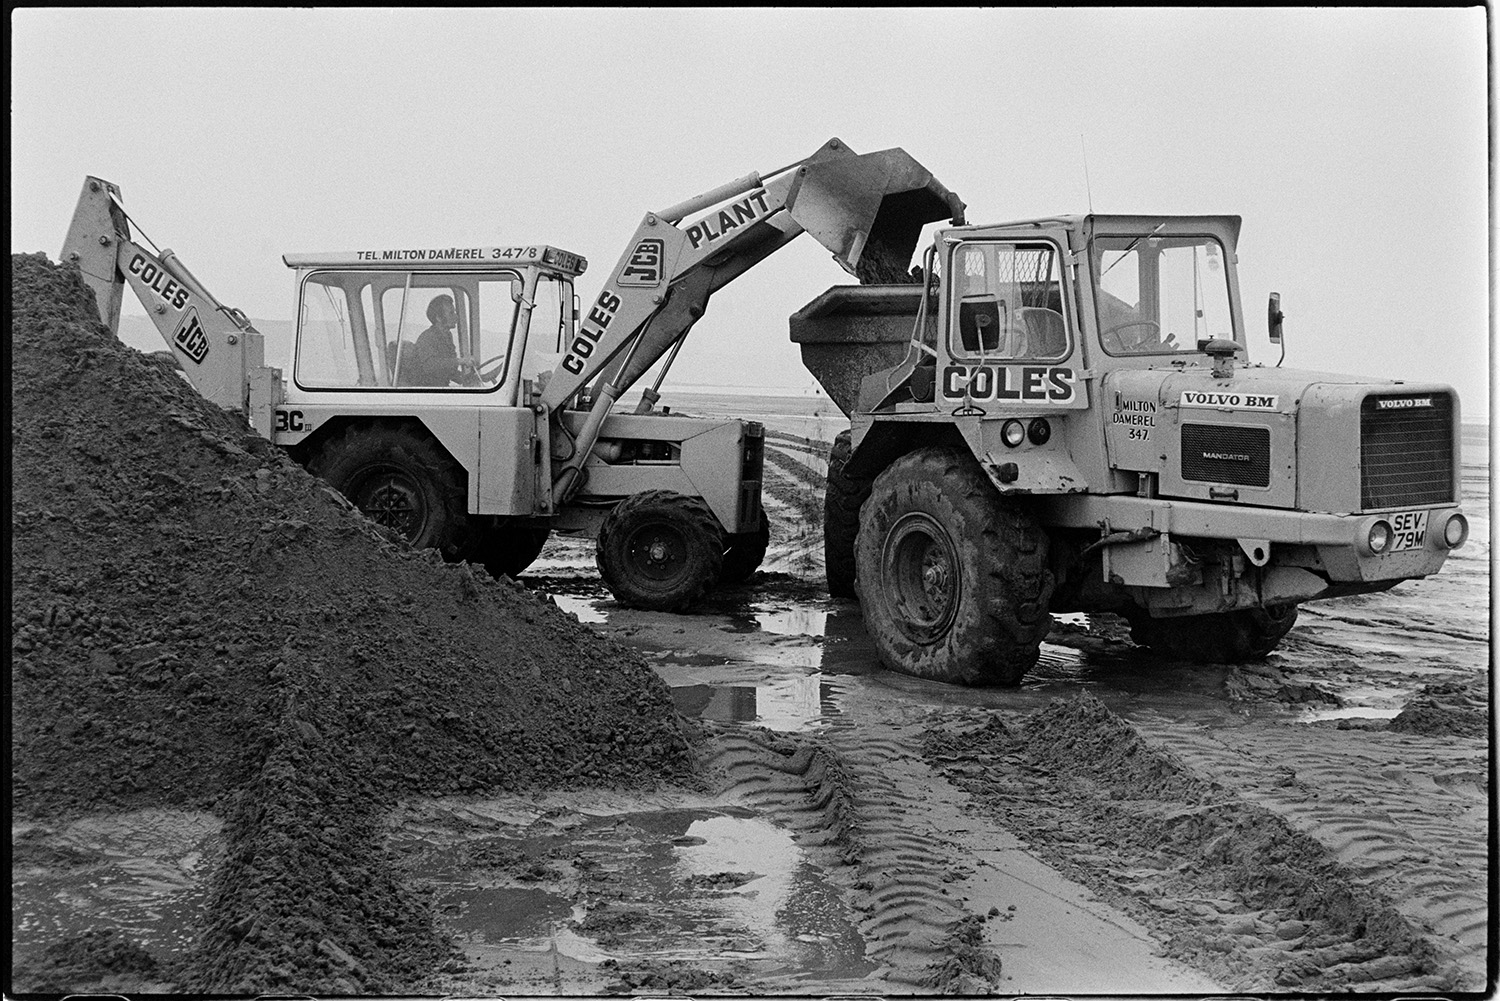 Diggers and earth movers taking oil off polluted beach. 
[A JCB digger loading sand into a dumper truck at Westward Ho! Beach to remove oil from the beach.]